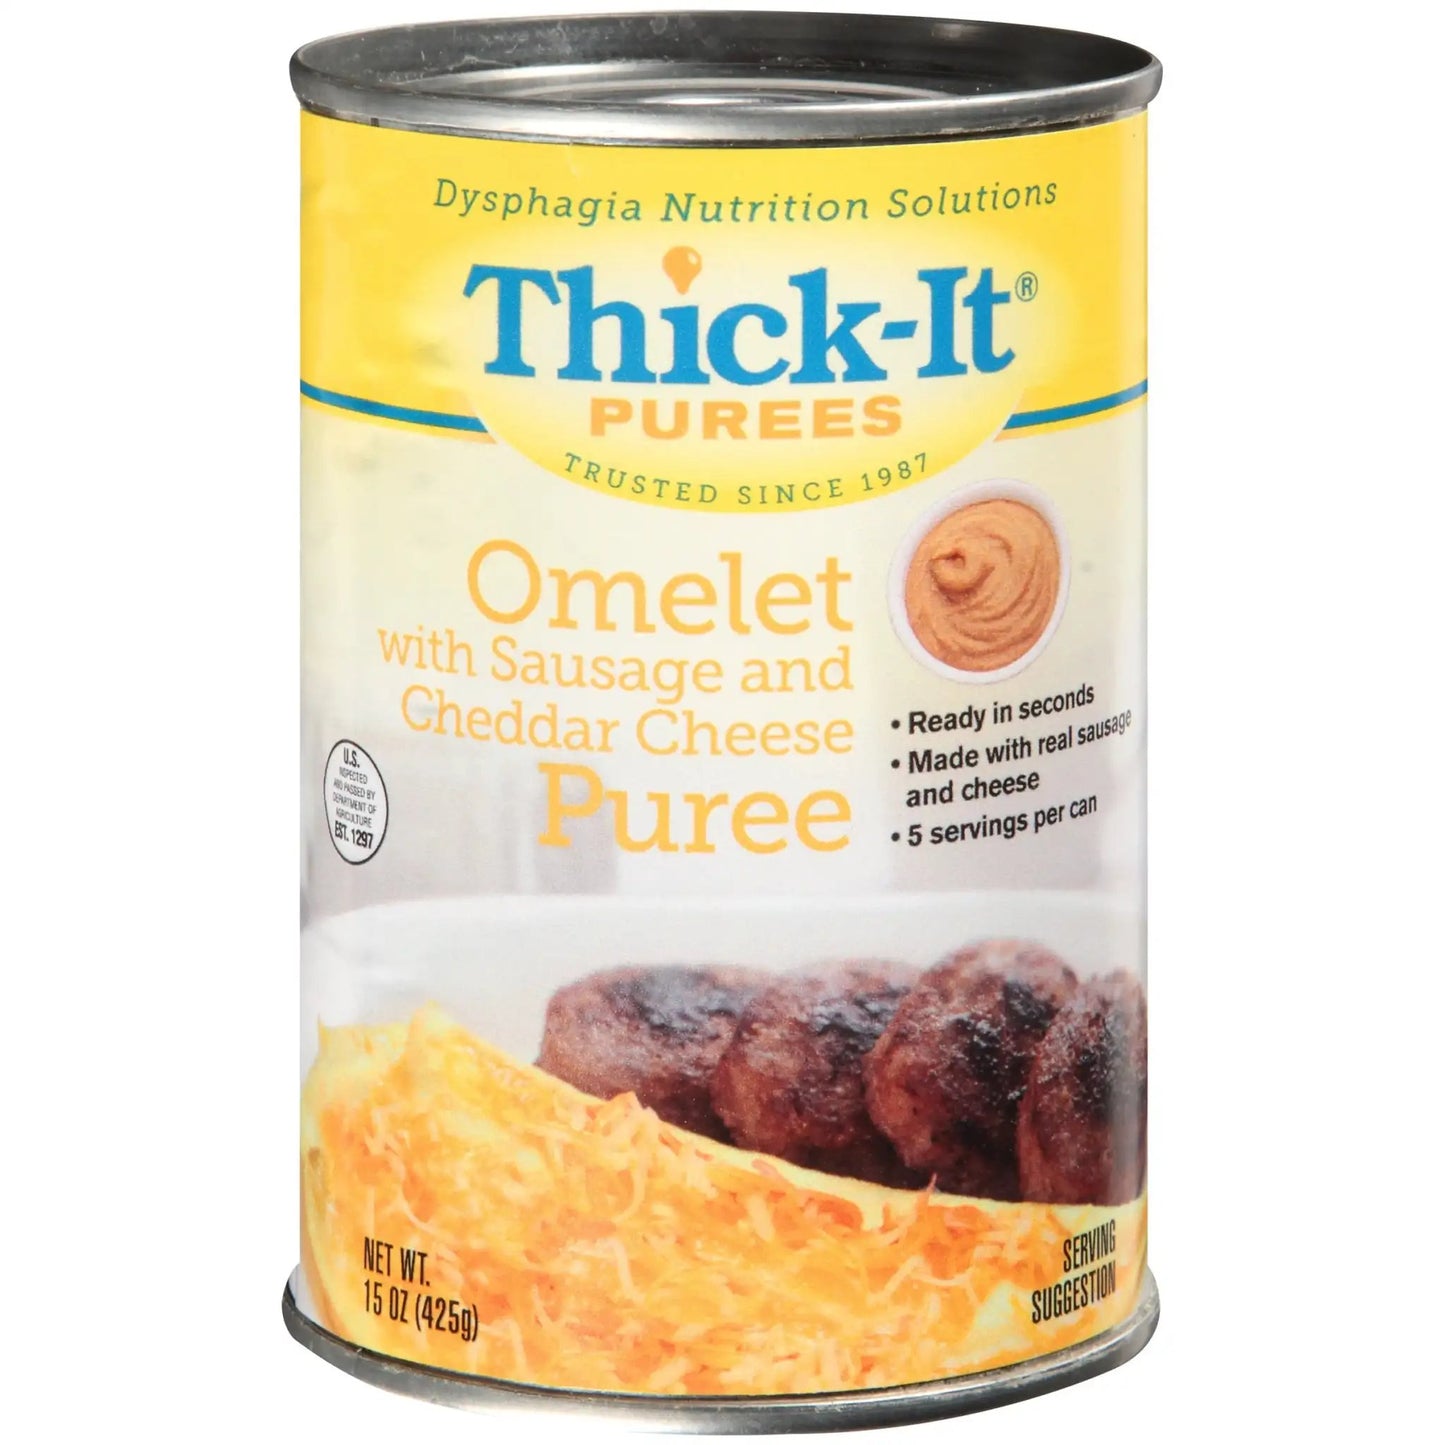 Thick-It Ready to Use Purees Omelet with Sausage and Cheddar Cheese Purée, 15 oz. Can